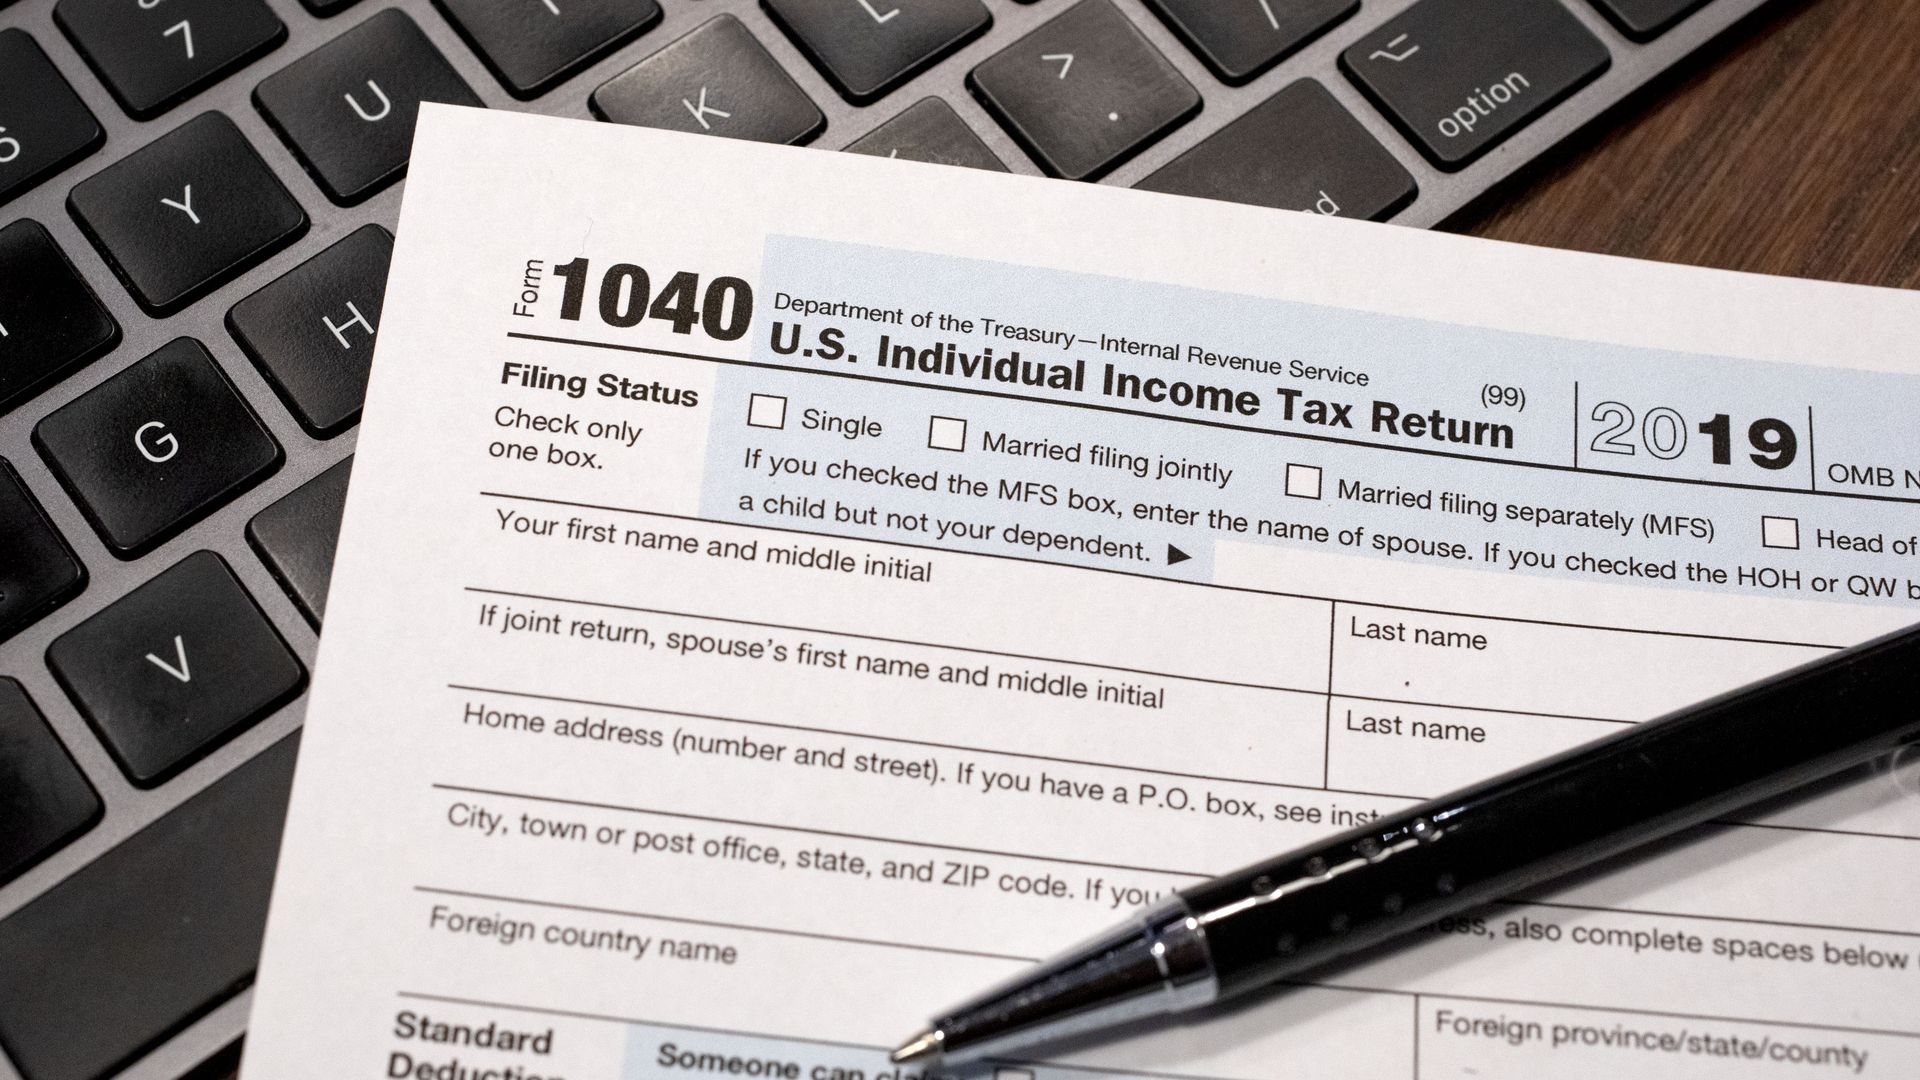 IRS 1040 Individual Income Tax form for the 2019 tax year